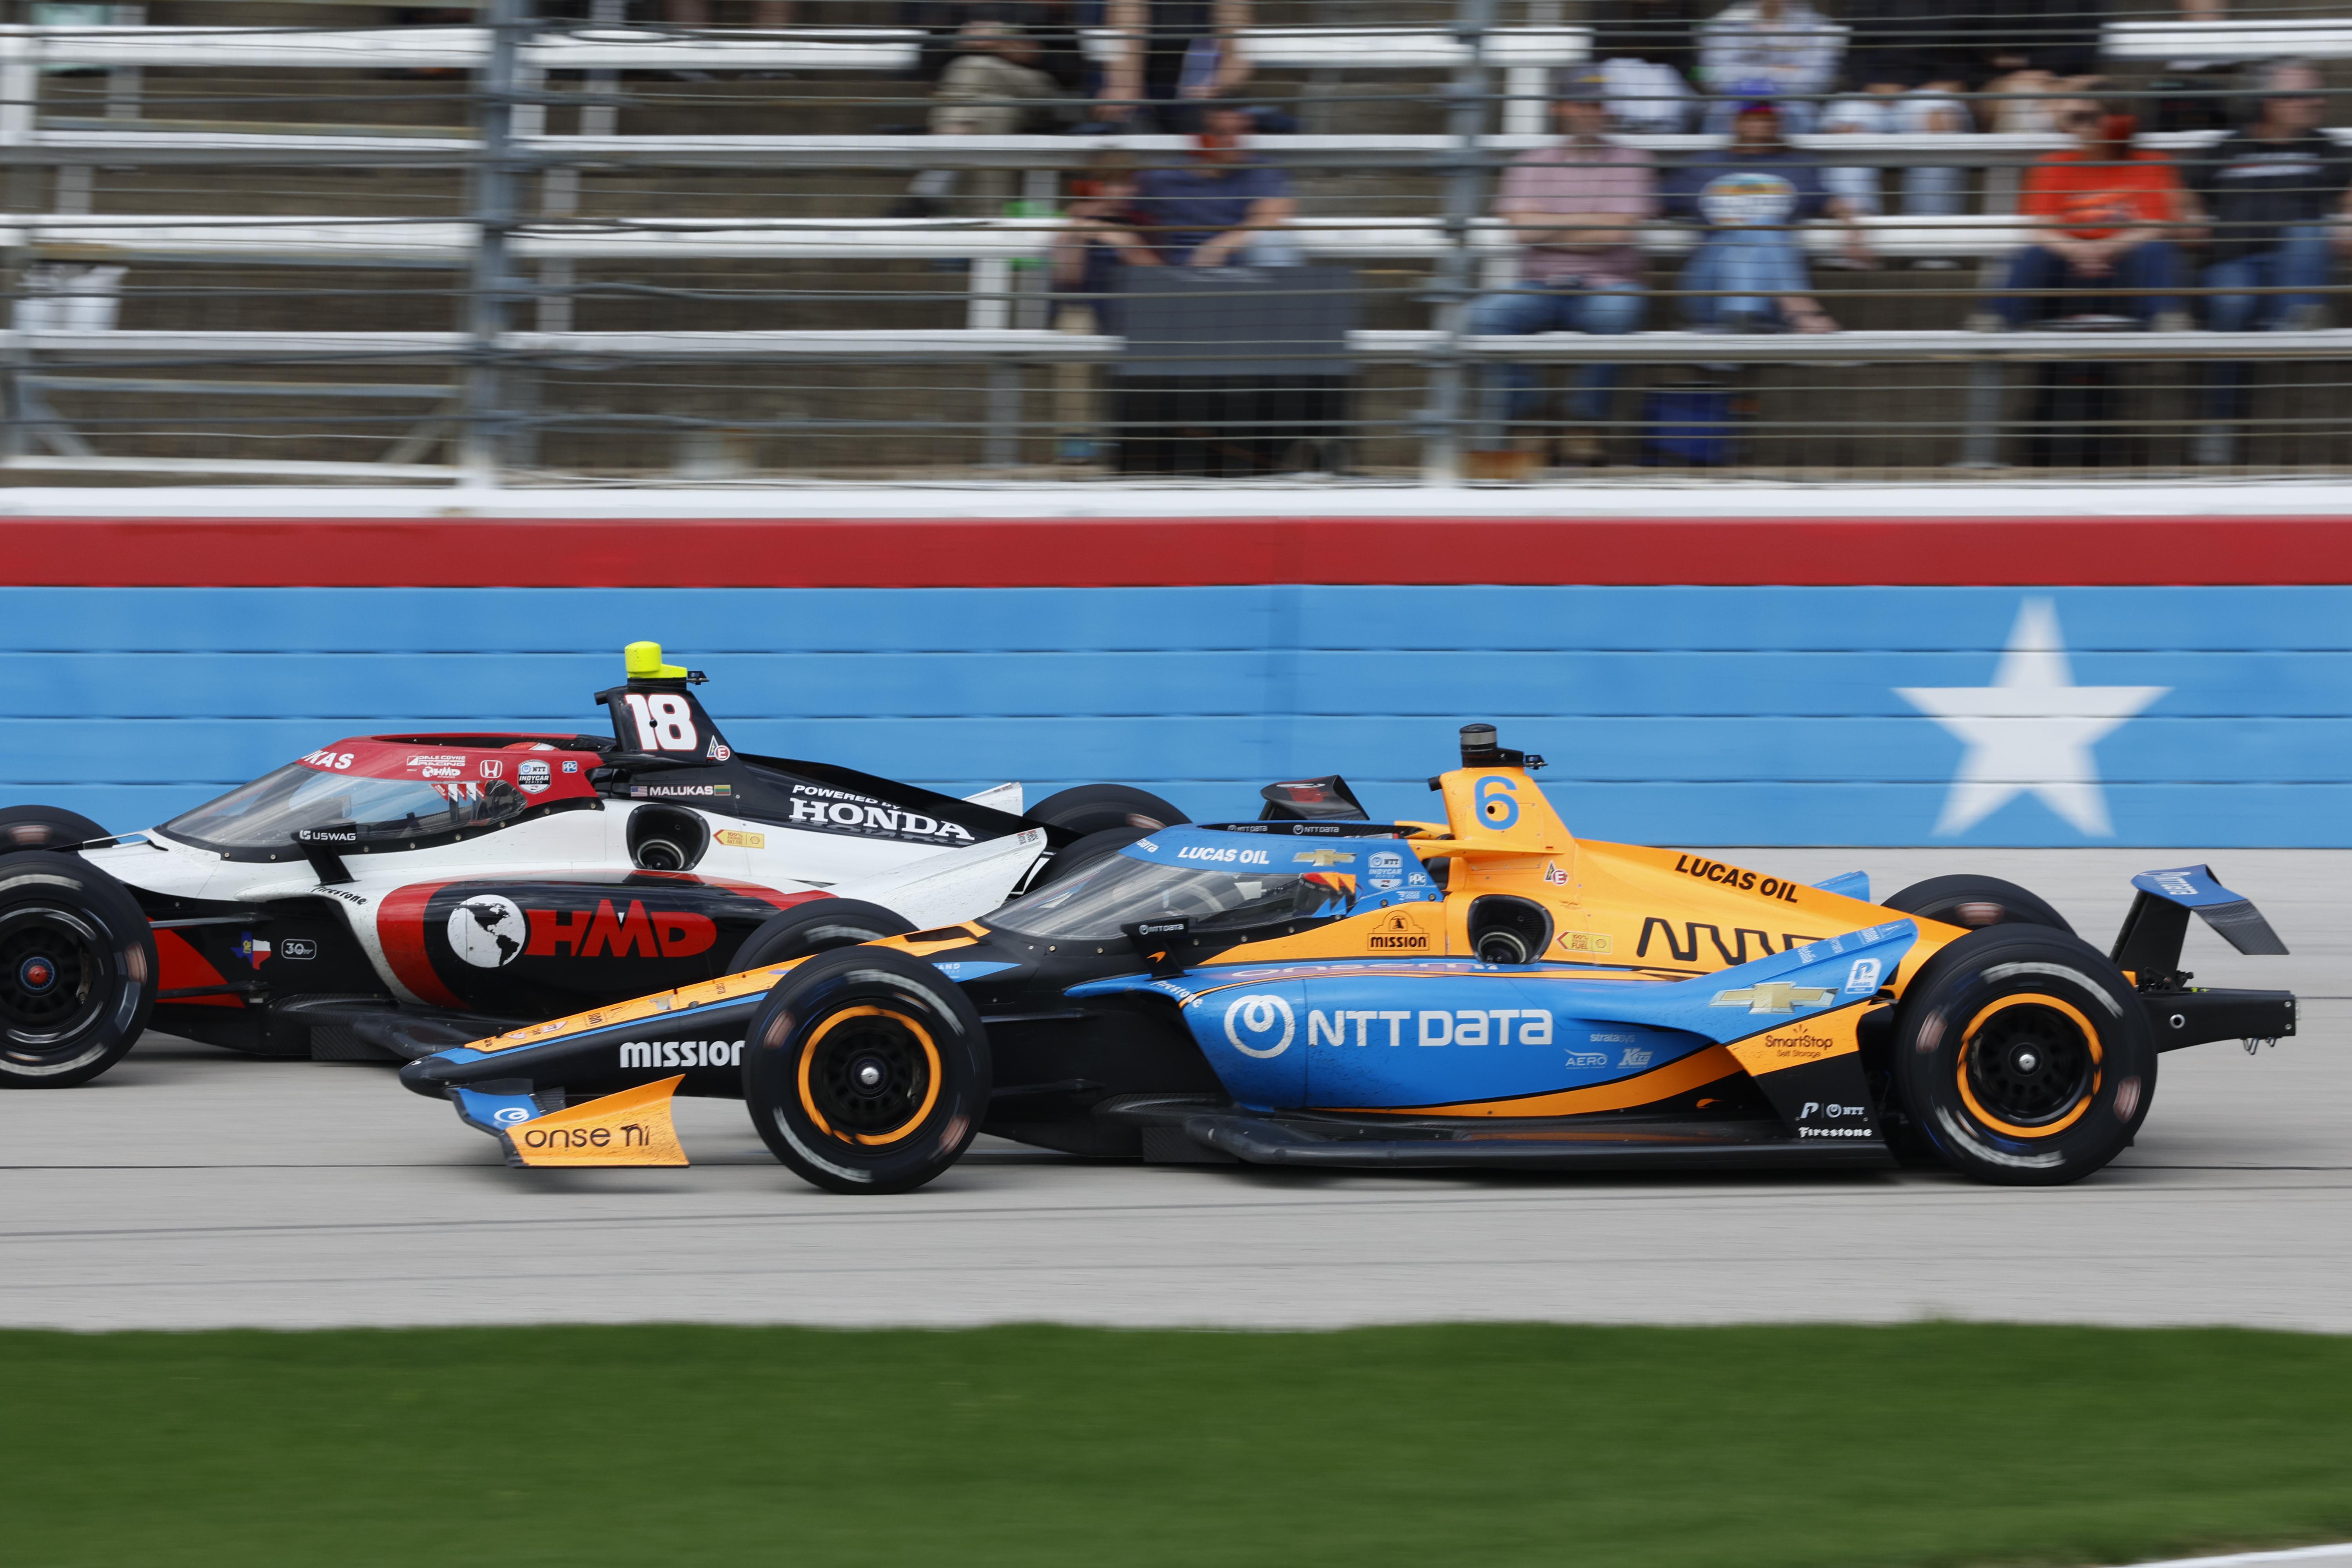 David Malukas And Felix Rosenqvist Ppg 375 At Texas Motor Speedway By Chris Jones Large Image Without Watermark M81231